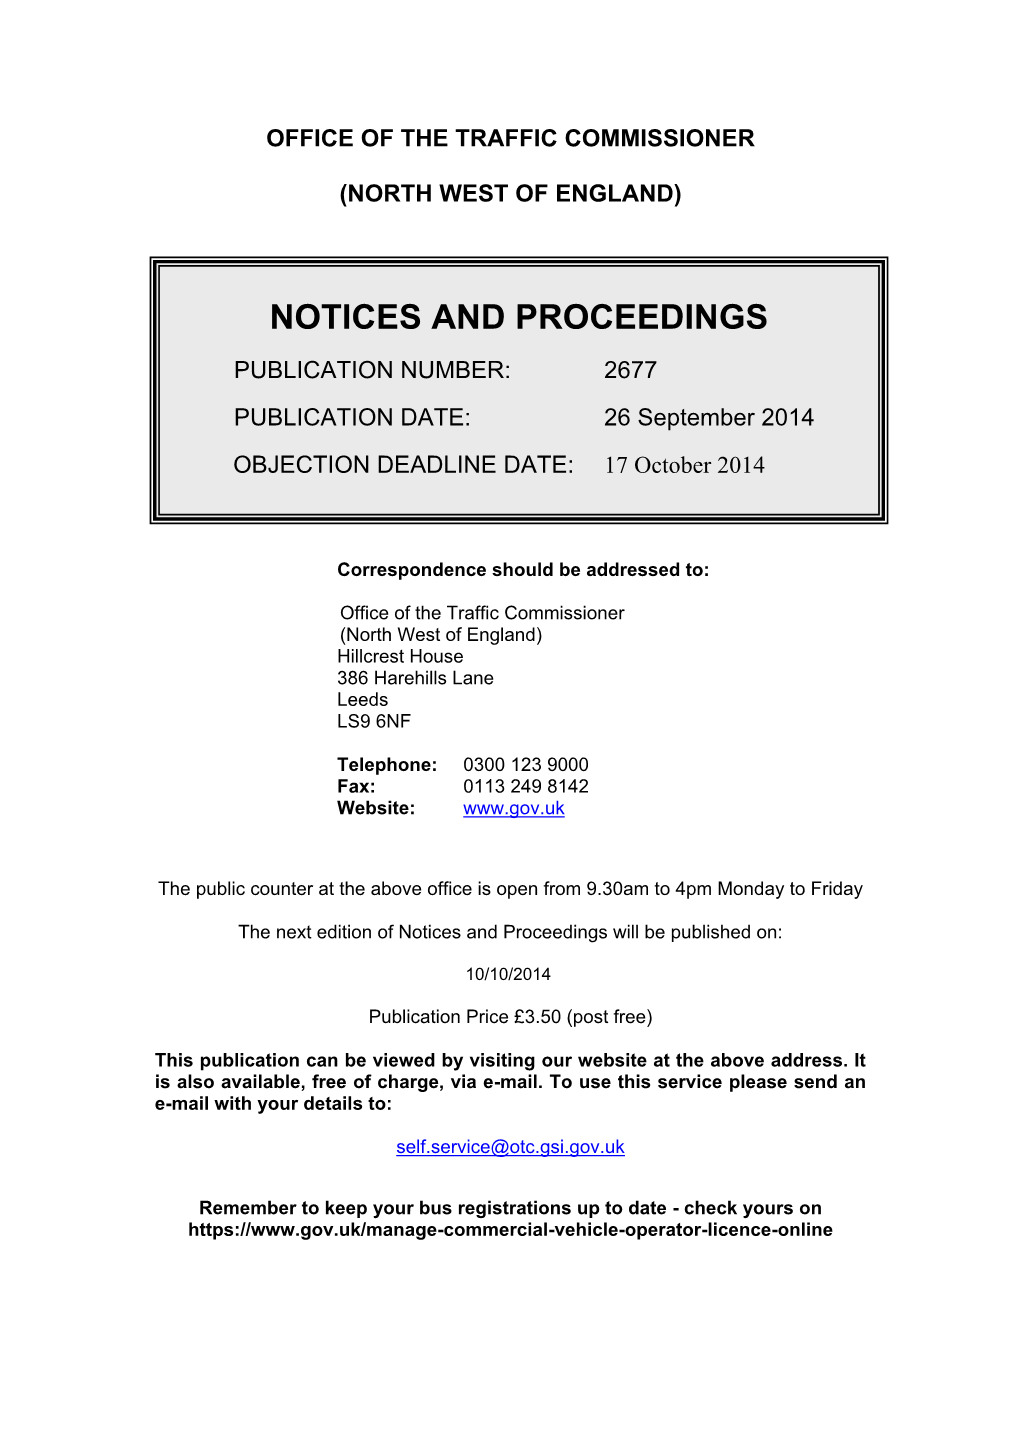 Notices and Proceedings 26 September 2014